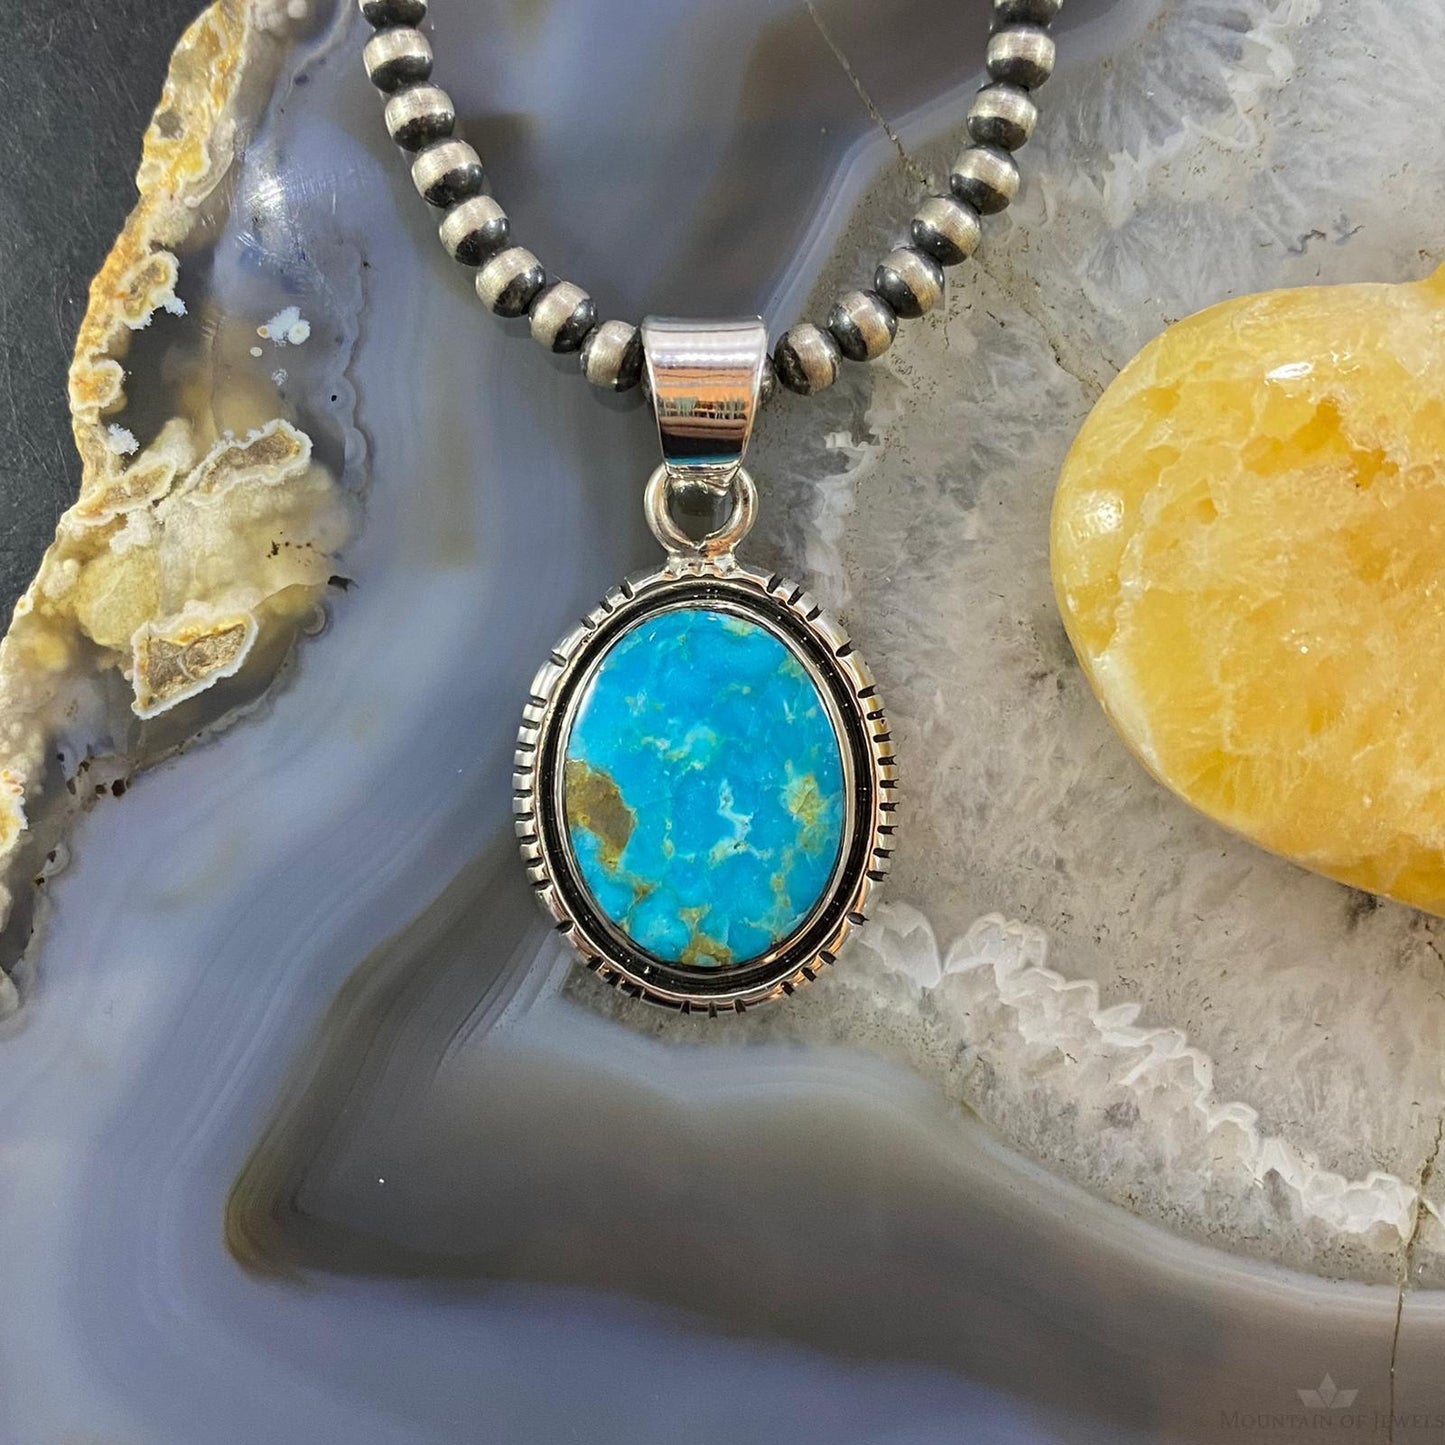 Native American Sterling Silver Blue Ridge Turquoise Oval Pendant For Women